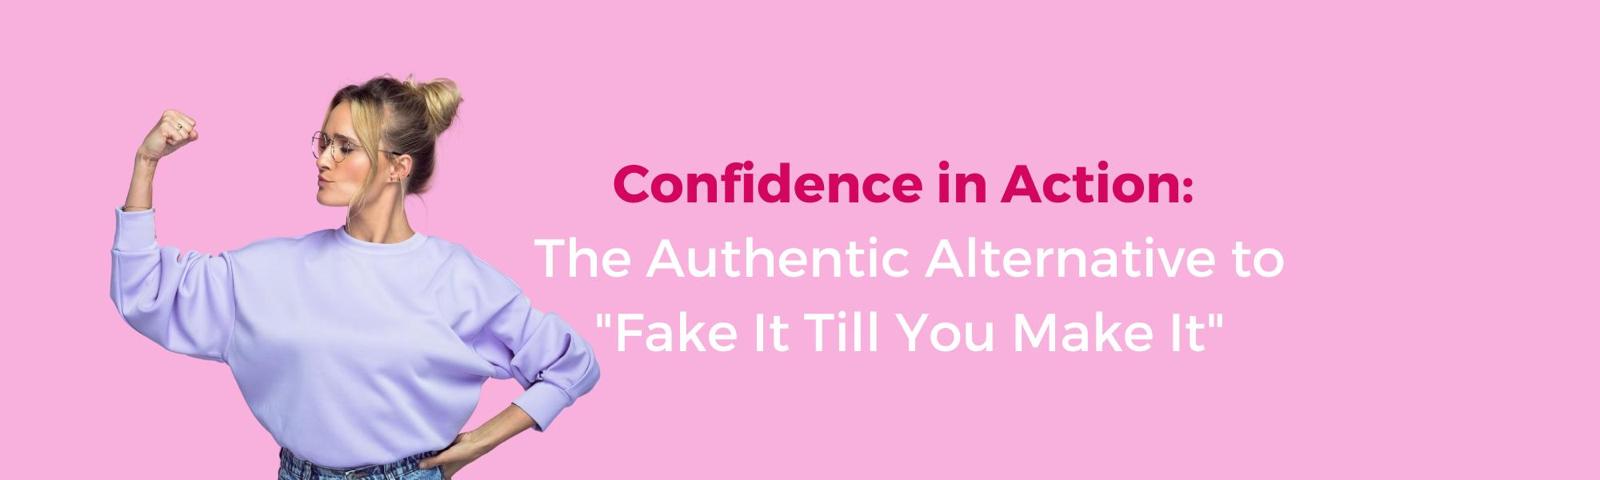 Confidence in Action: The Authentic Alternative to "Fake It Till You Make It"